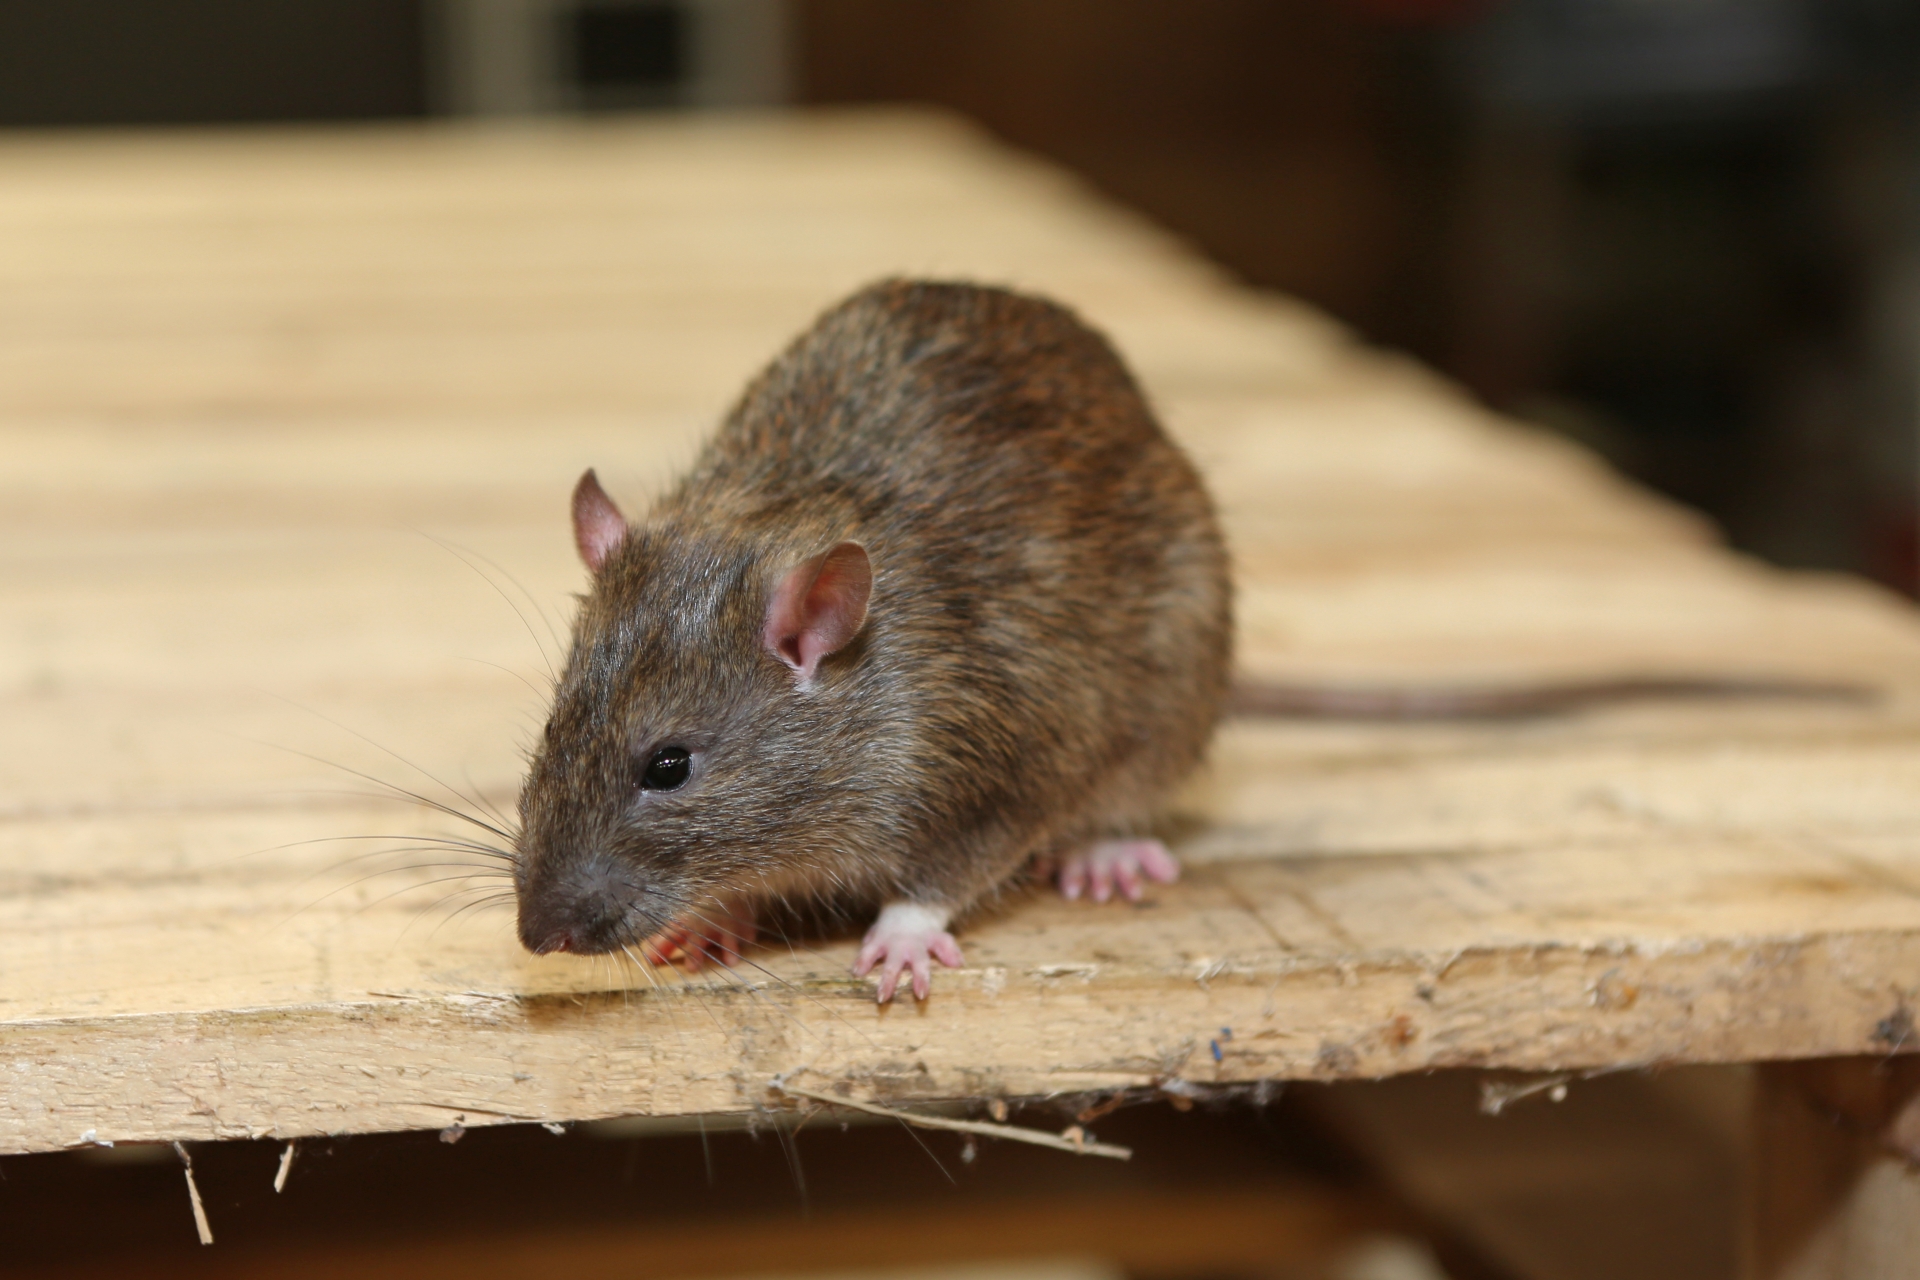 Rat extermination, Pest Control in Ealing, W5. Call Now 020 8166 9746